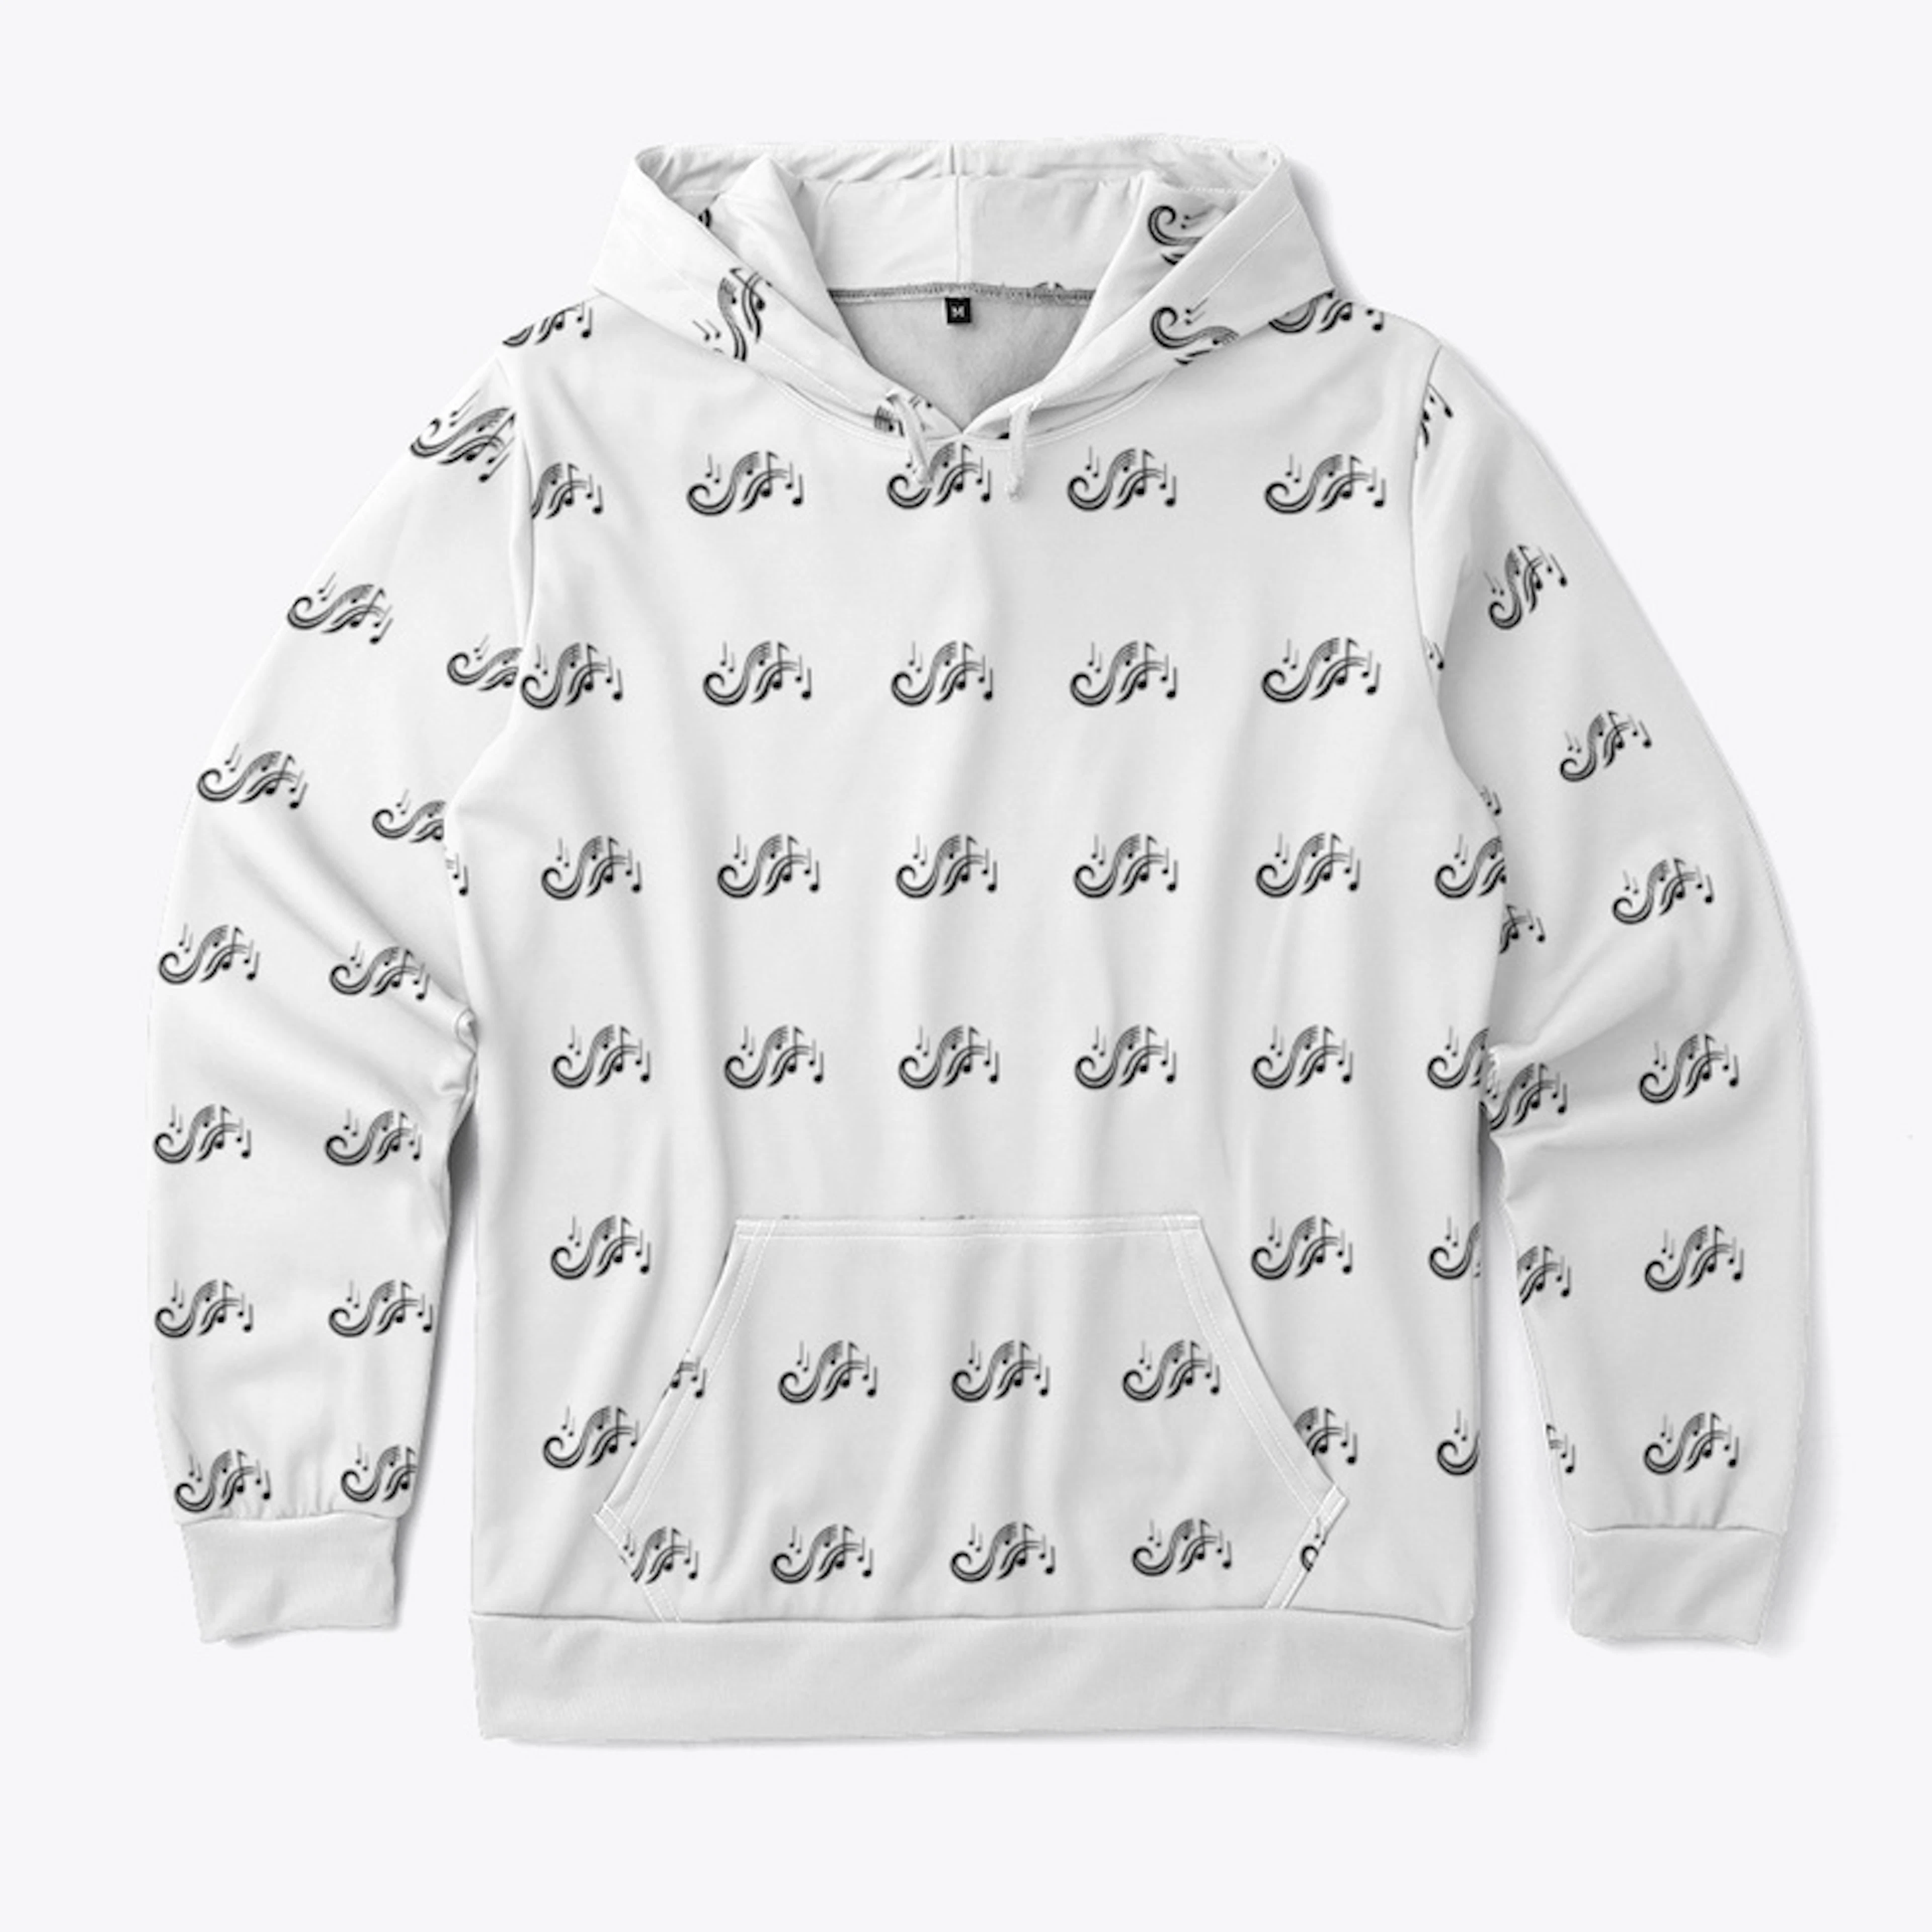 Melodic All-Over Print (White)